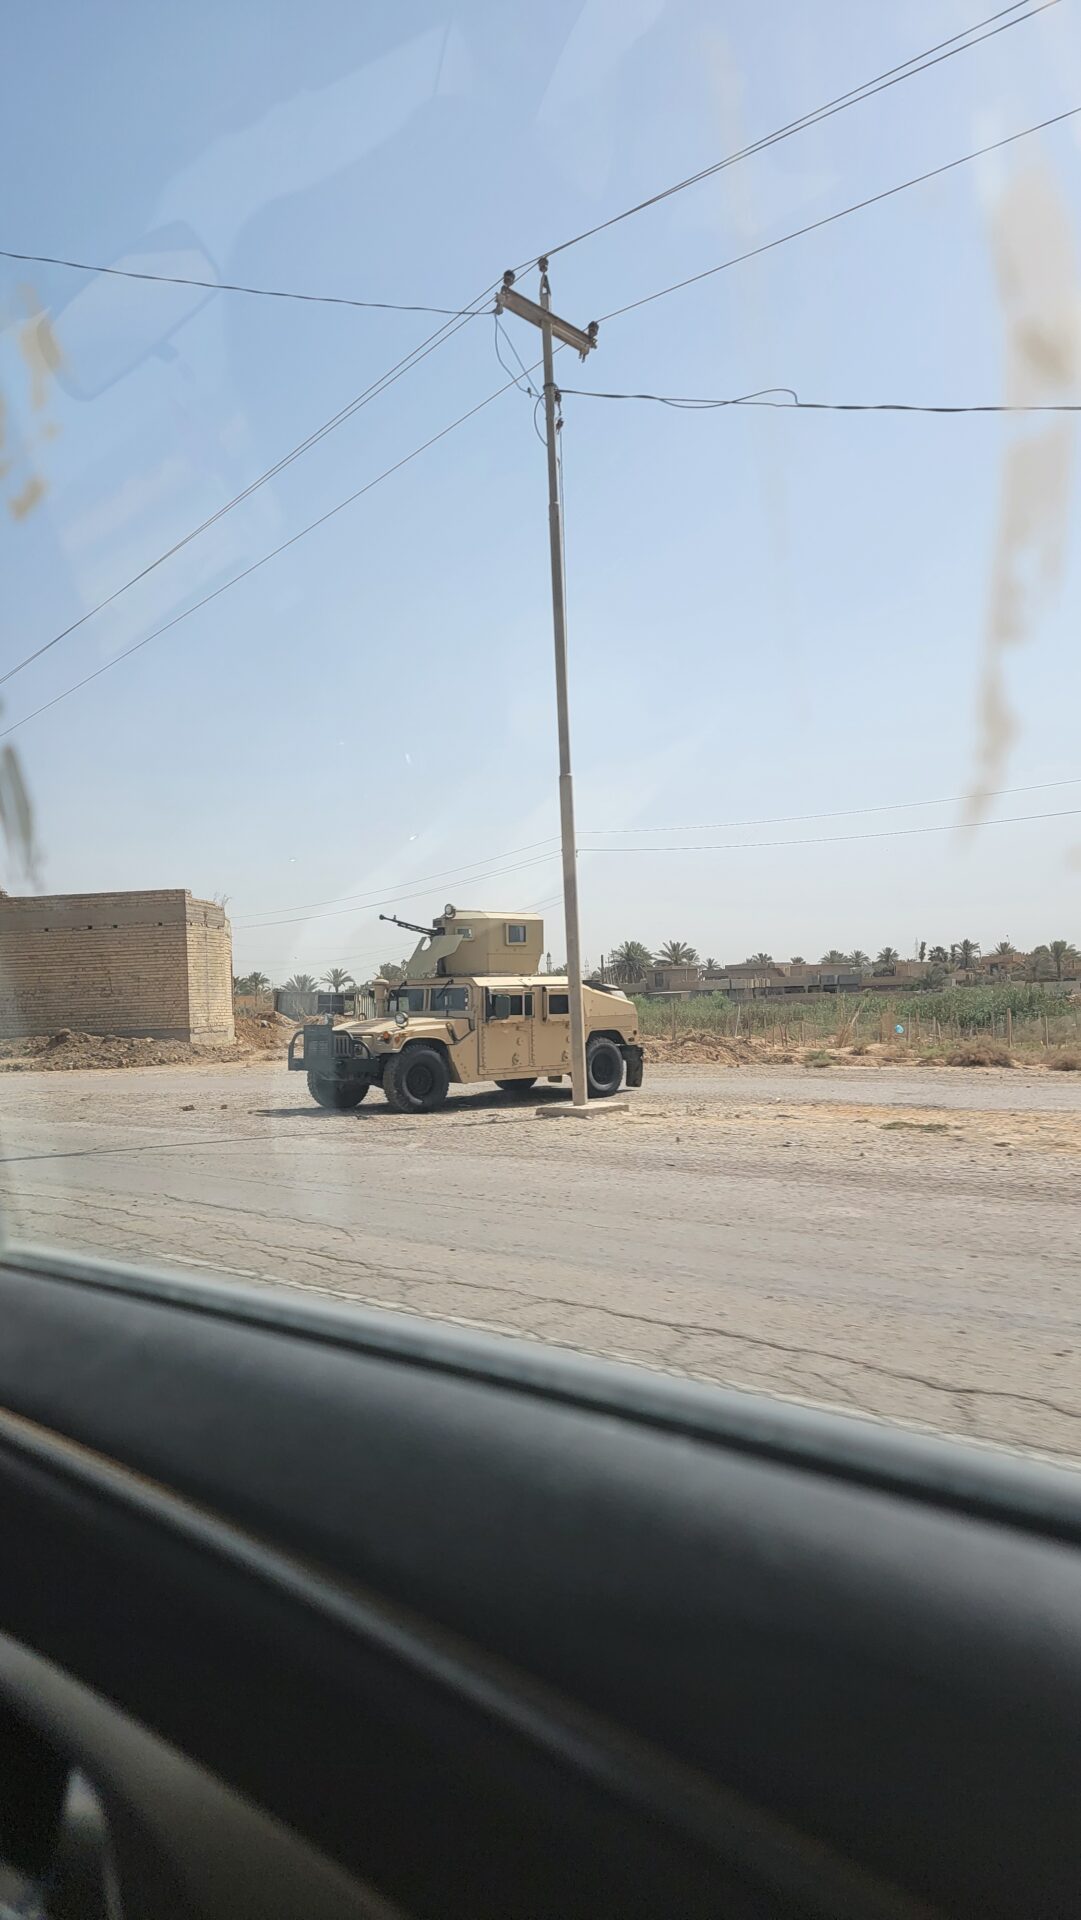 a military vehicle on the road